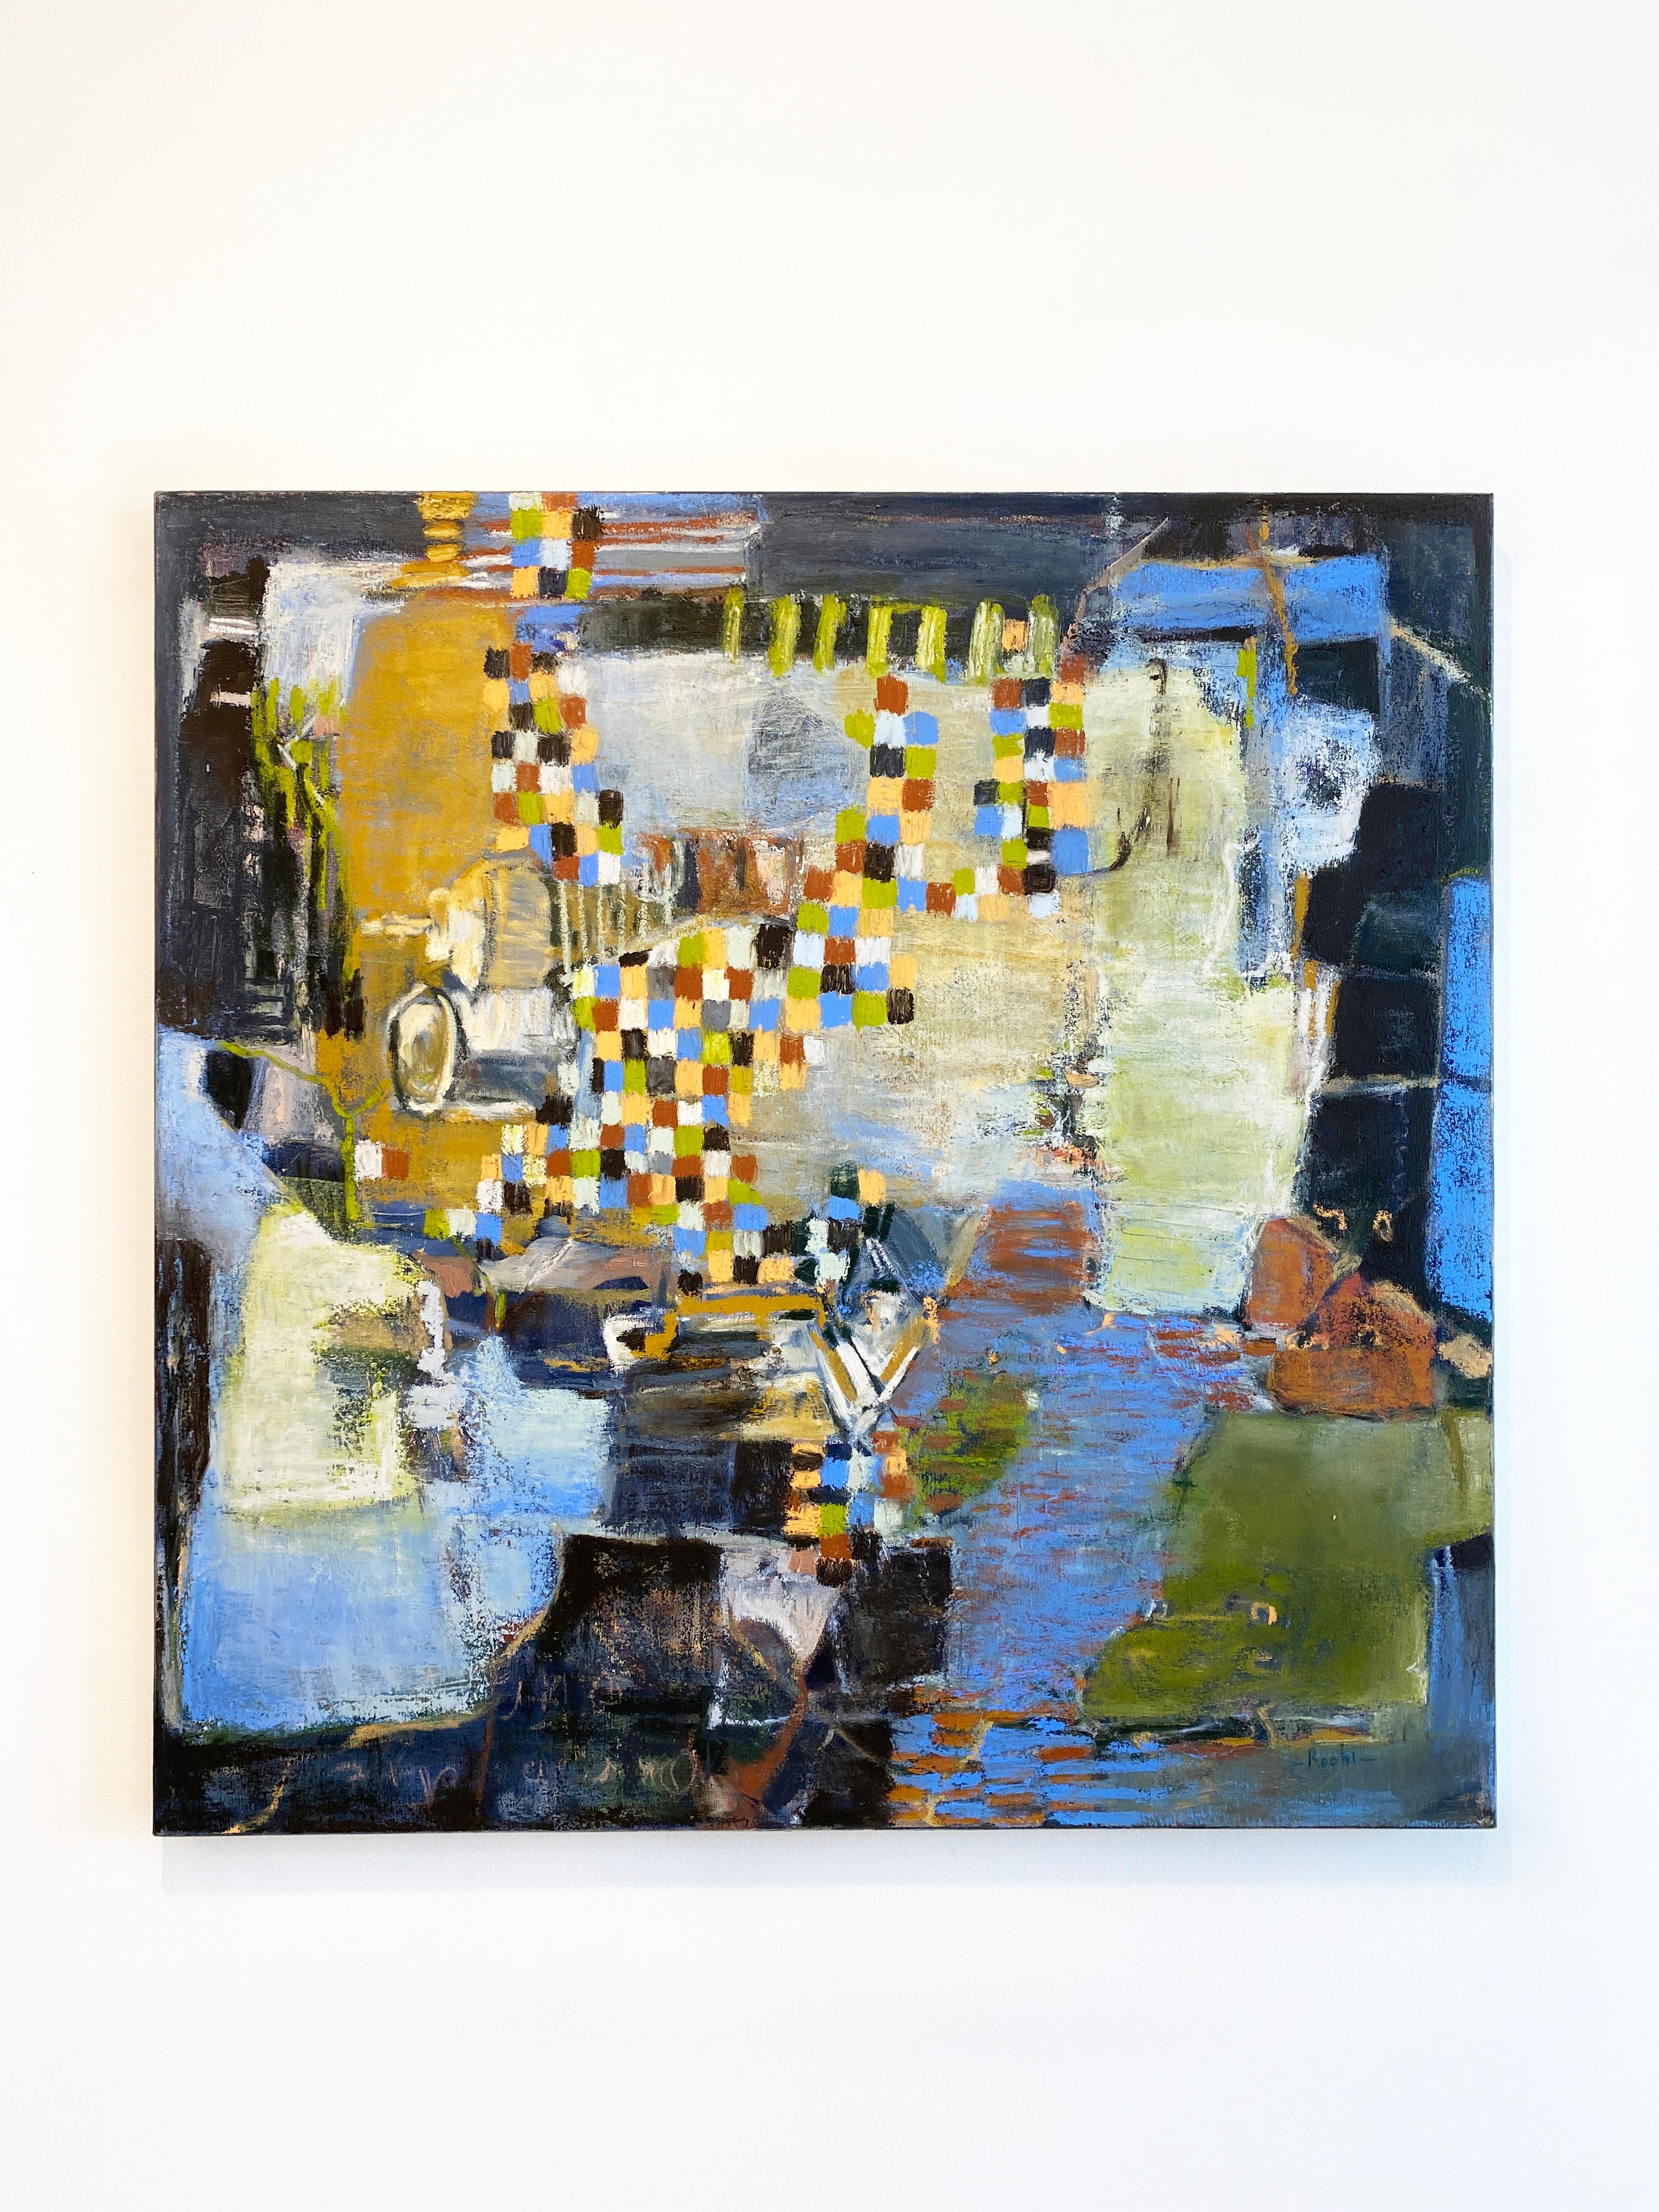 Available at Madelyn Jordon Fine Art.  'Stronger Together' 2022 by Roohi Saleem. Oil and oil sticks on canvas, 40 x 40 in. This colorful painting is constructed as a dense compostition of abstract forms, featuring various shades of yellow, green,